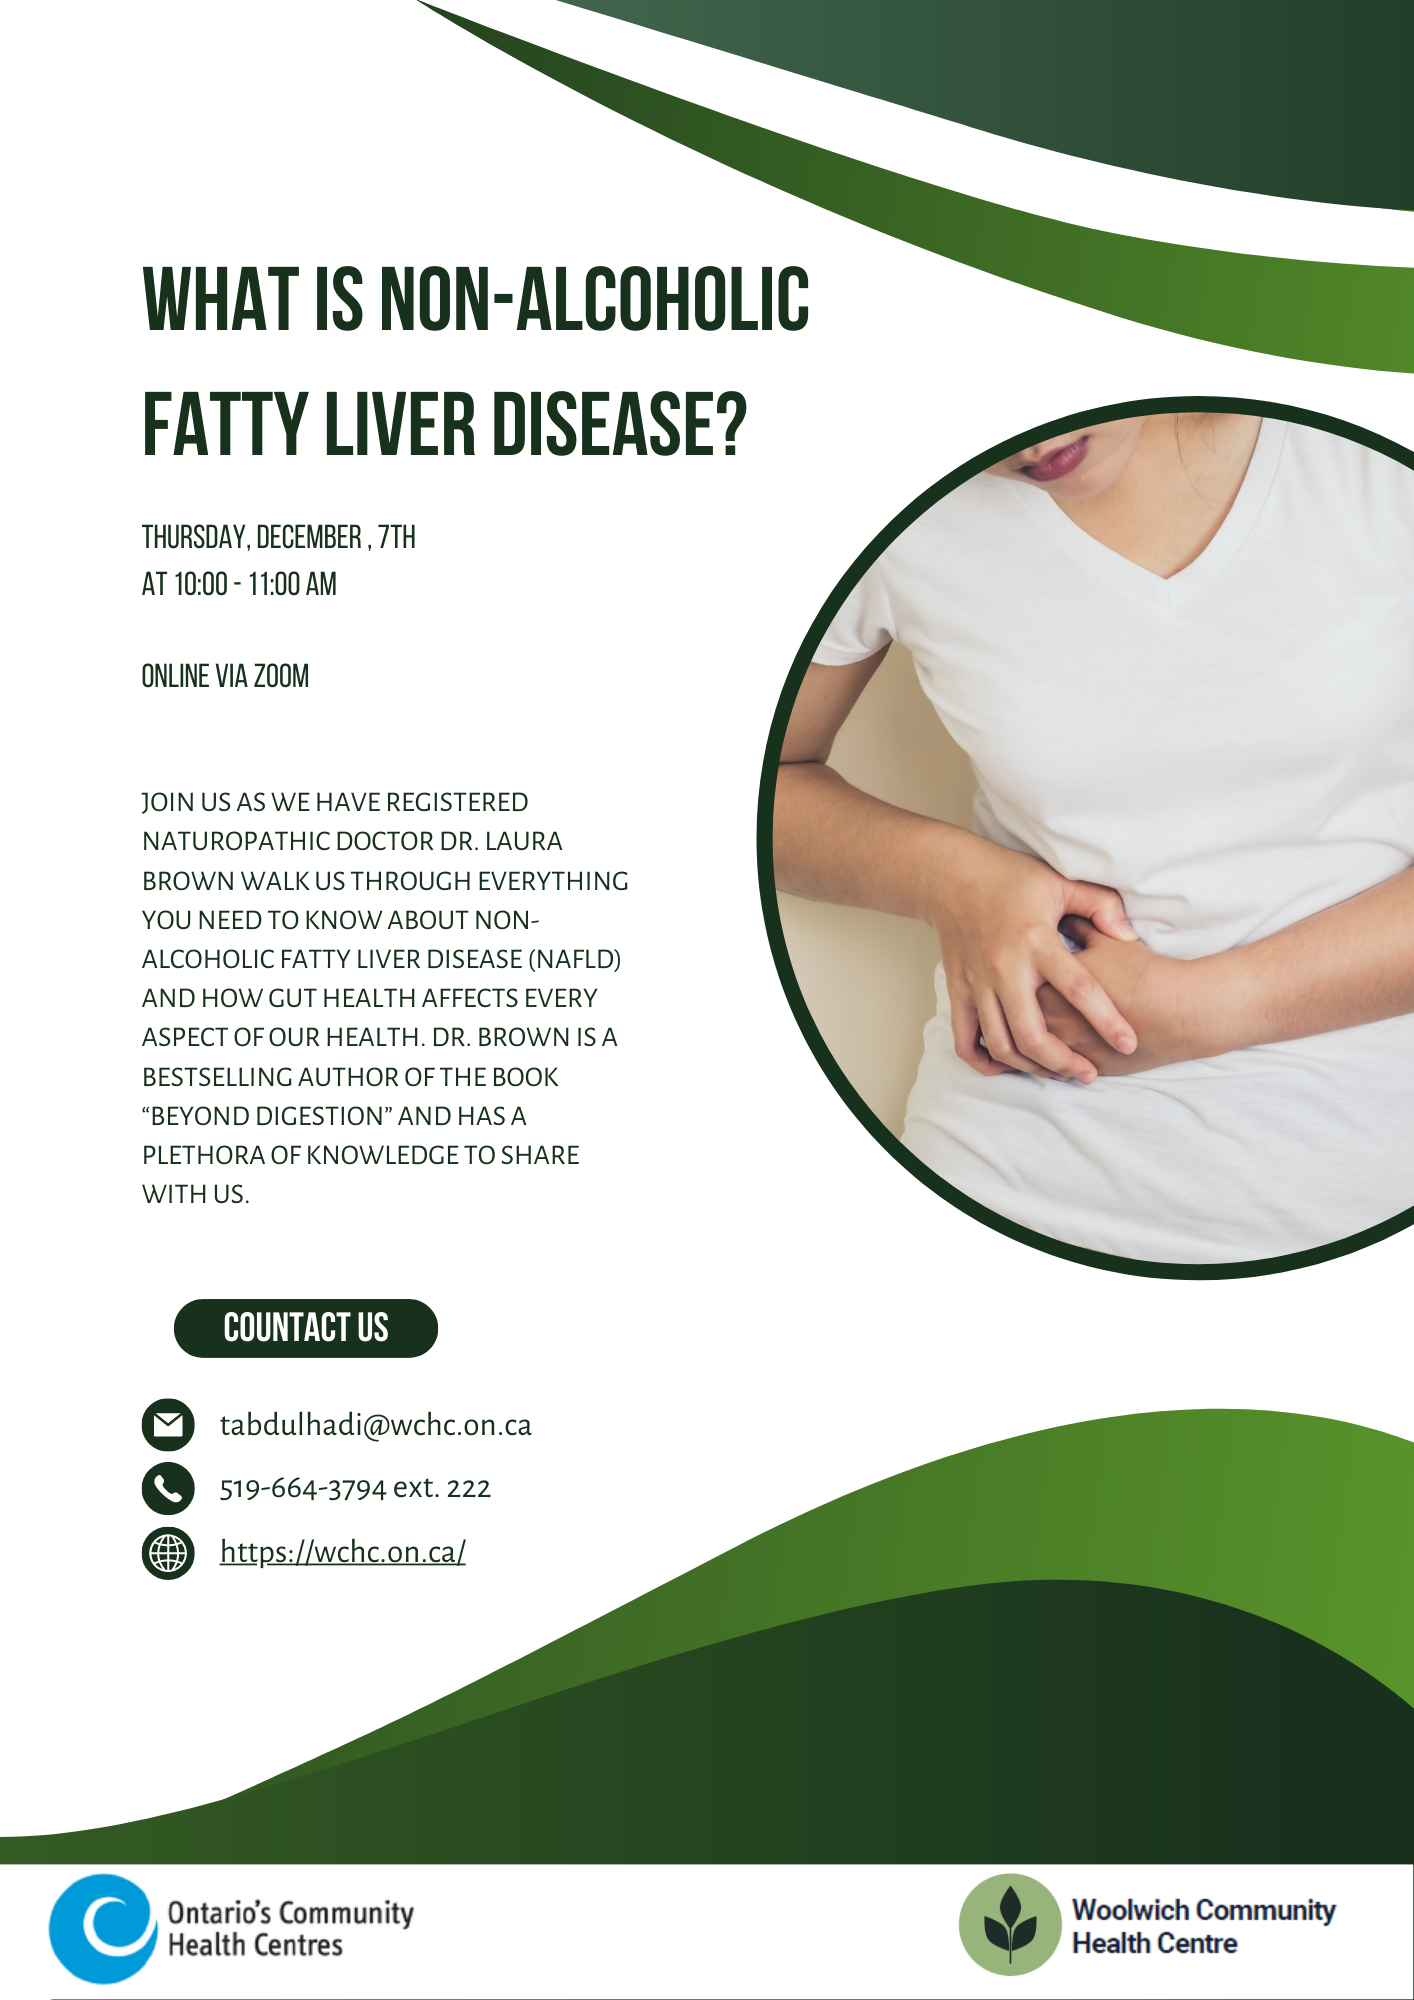 What is Non-alcoholic Fatty Liver Disease?